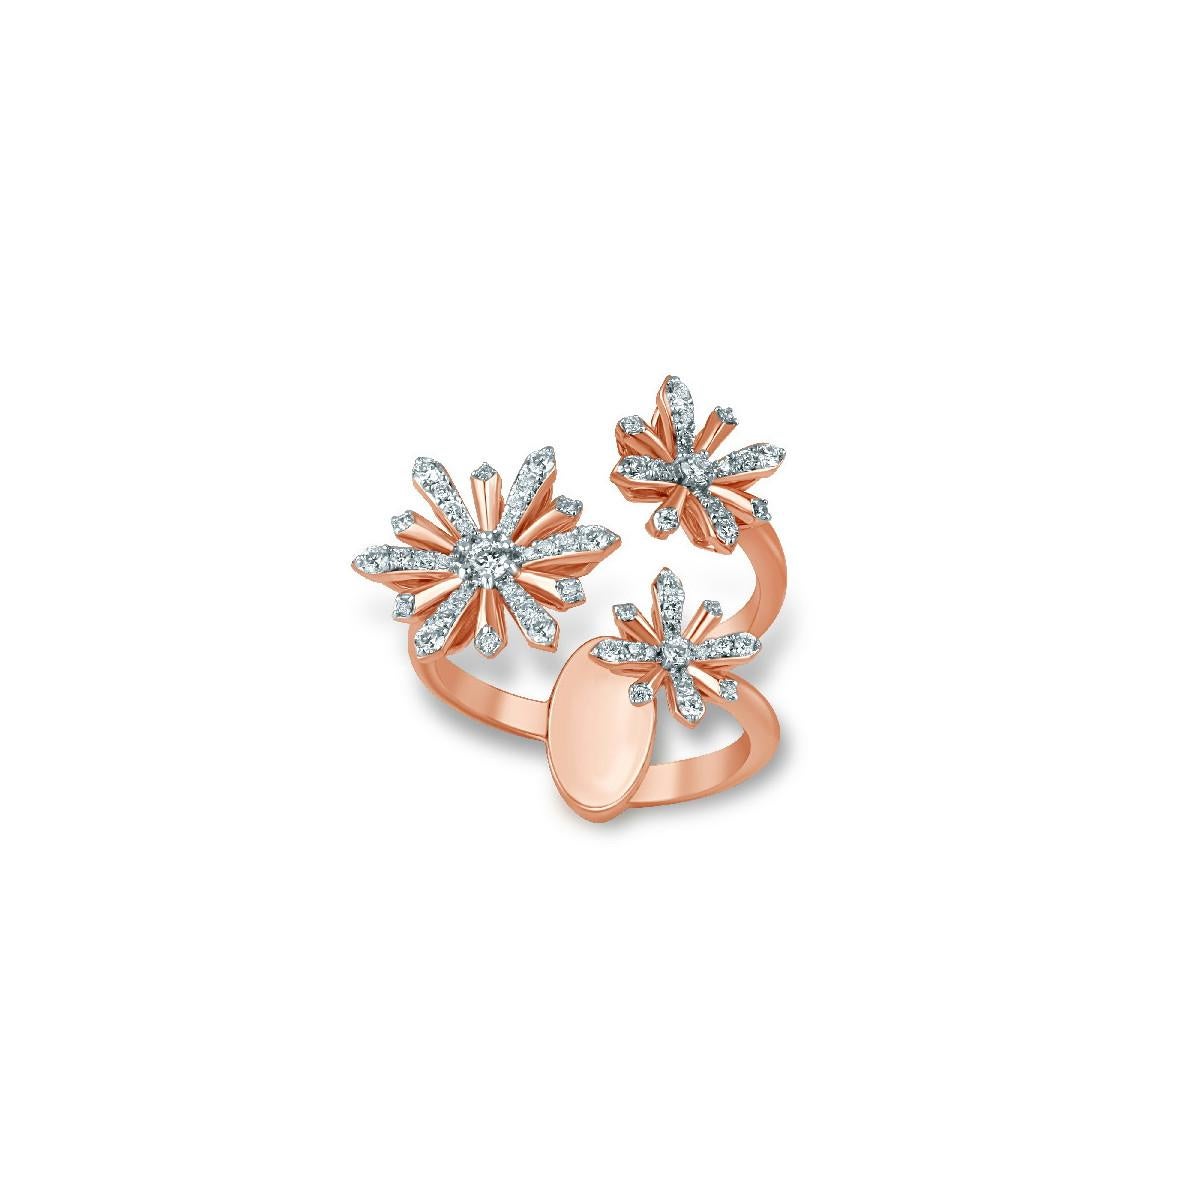 Edelweiss collection...
Option of yellow or white gold.
Pieces make to order in finish and size
18k Rose gold and diamond ring with three flowers
weighing 7,56 g and 65 diamonds 0.48 ct

The Alpine 